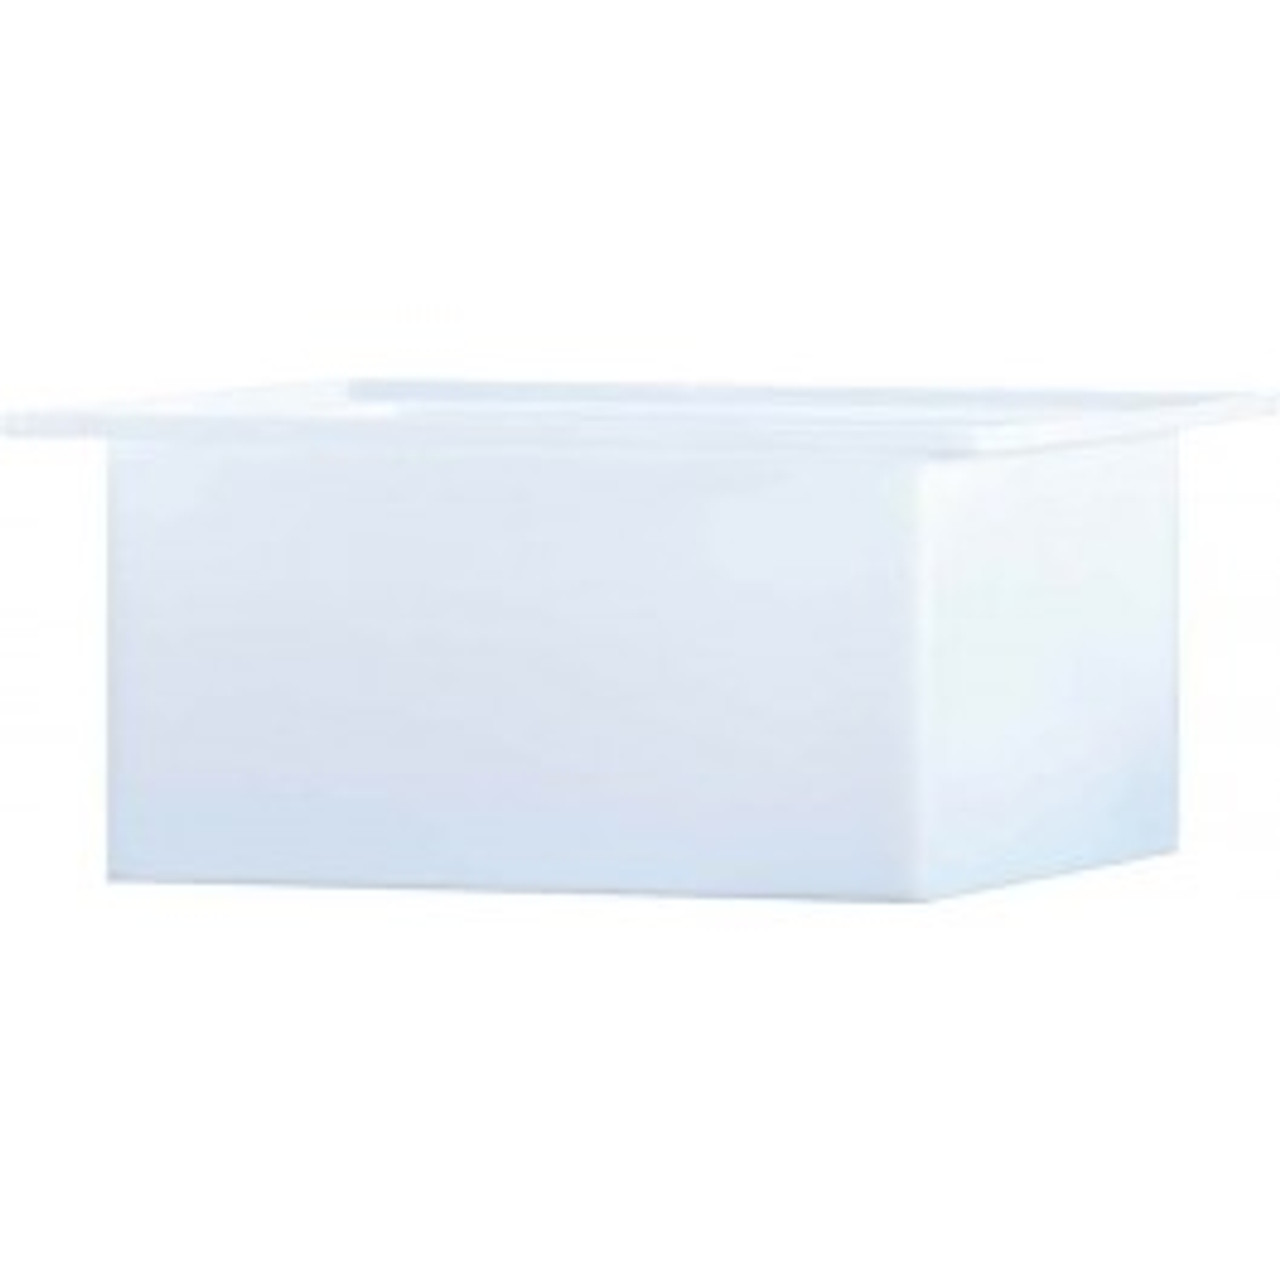 An image of a 44 Gallon PE Chem-Tainer White Rectangular Open Top Tank | R182424A